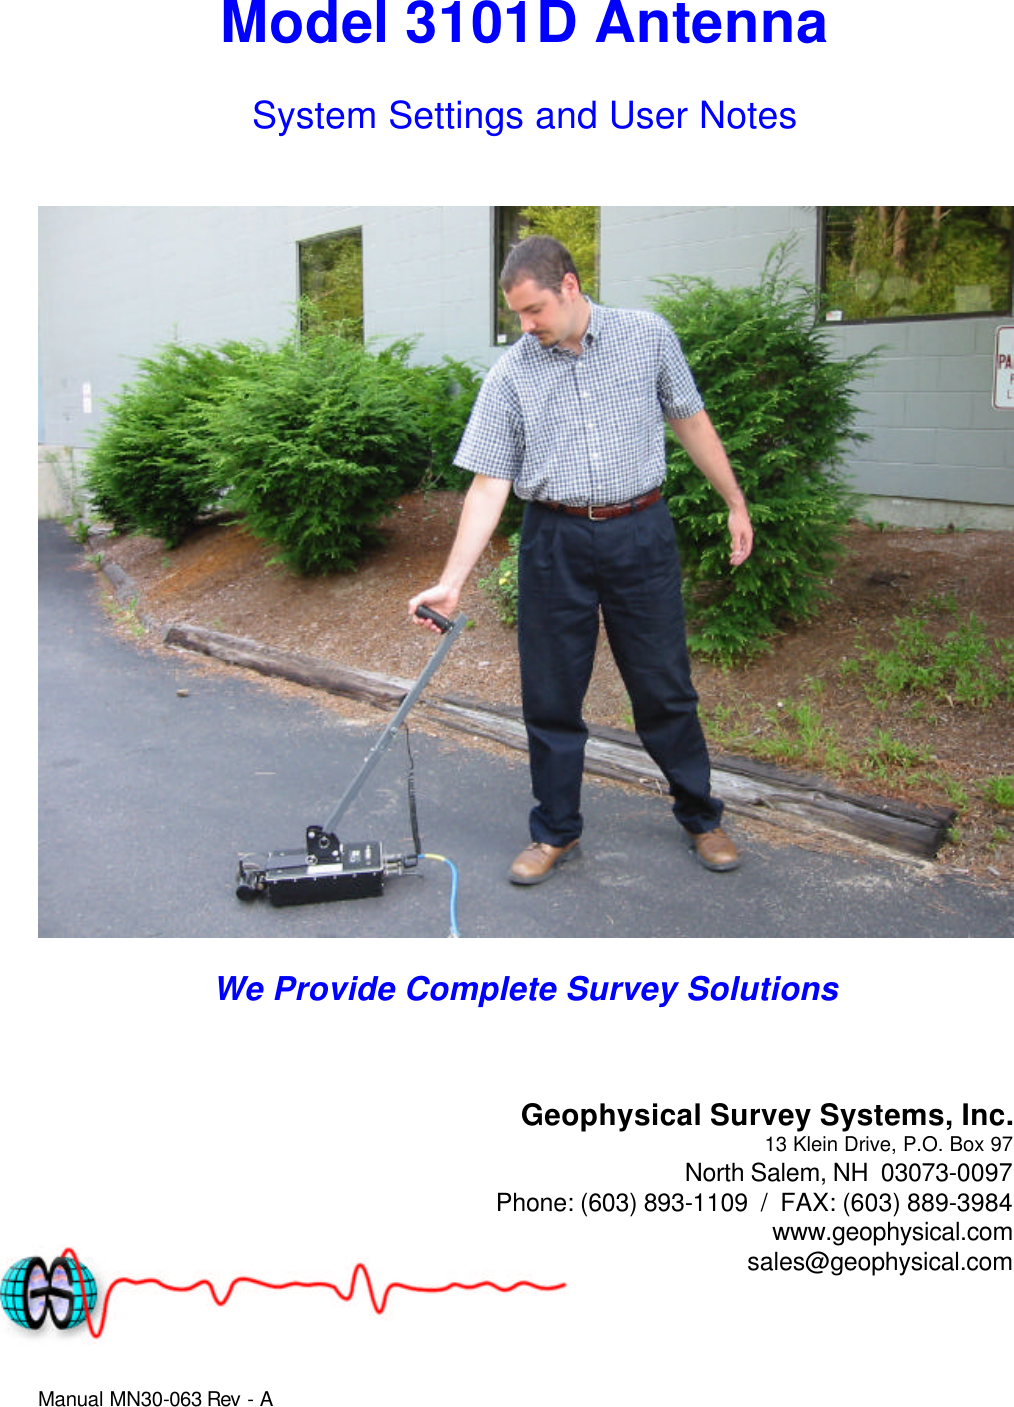 Manual MN30-063 Rev - A Model 3101D Antenna System Settings and User Notes    We Provide Complete Survey Solutions    Geophysical Survey Systems, Inc. 13 Klein Drive, P.O. Box 97 North Salem, NH  03073-0097 Phone: (603) 893-1109  /  FAX: (603) 889-3984 www.geophysical.com sales@geophysical.com 